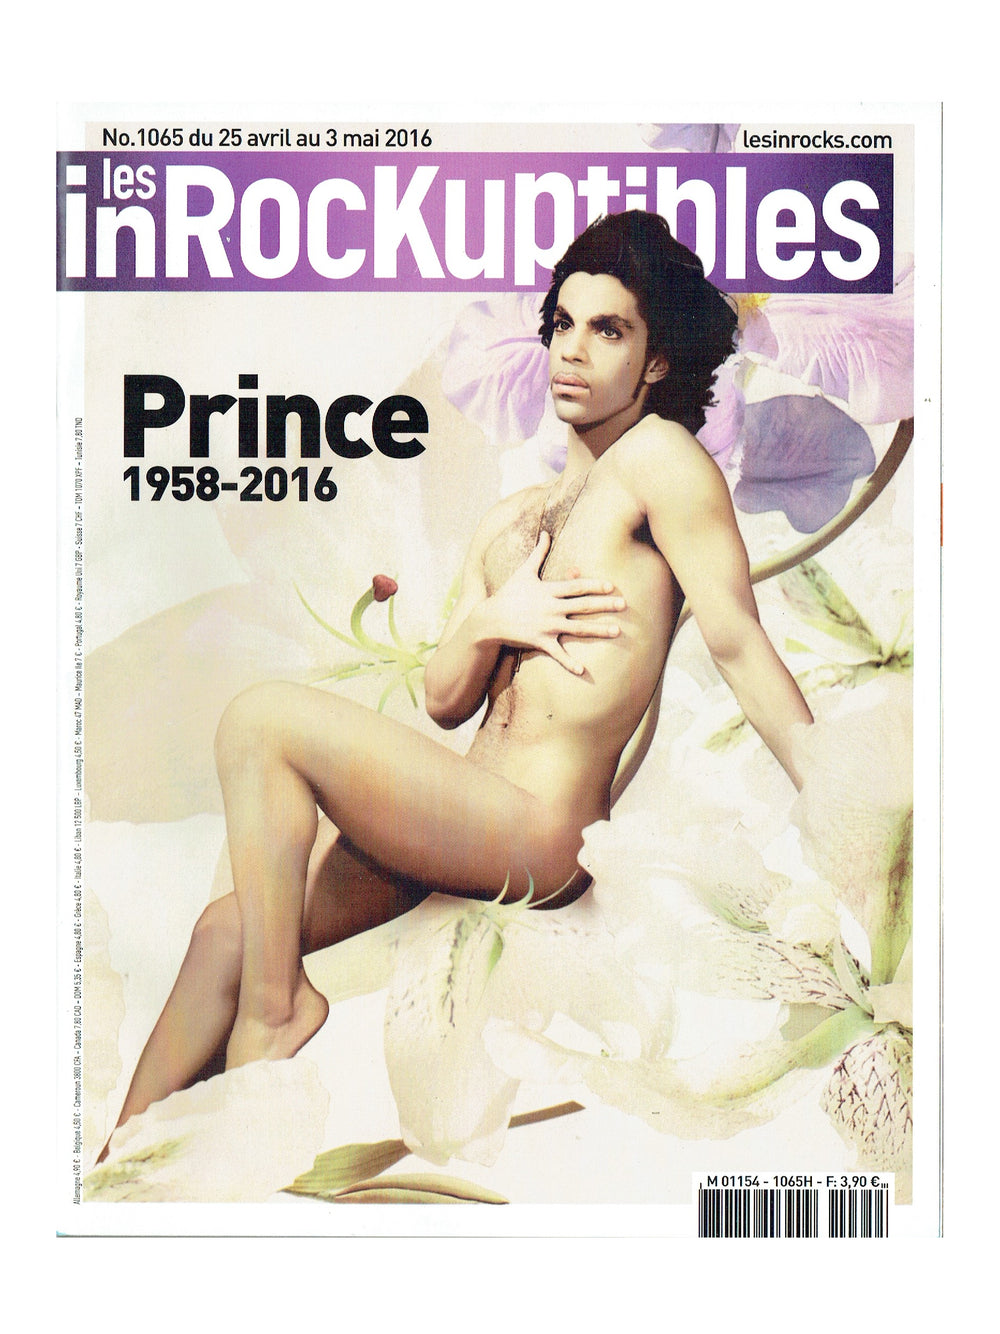 Prince – Les In Rockuptibles  French Magazine Front Cover & 21 Page Article Prelved: 2016